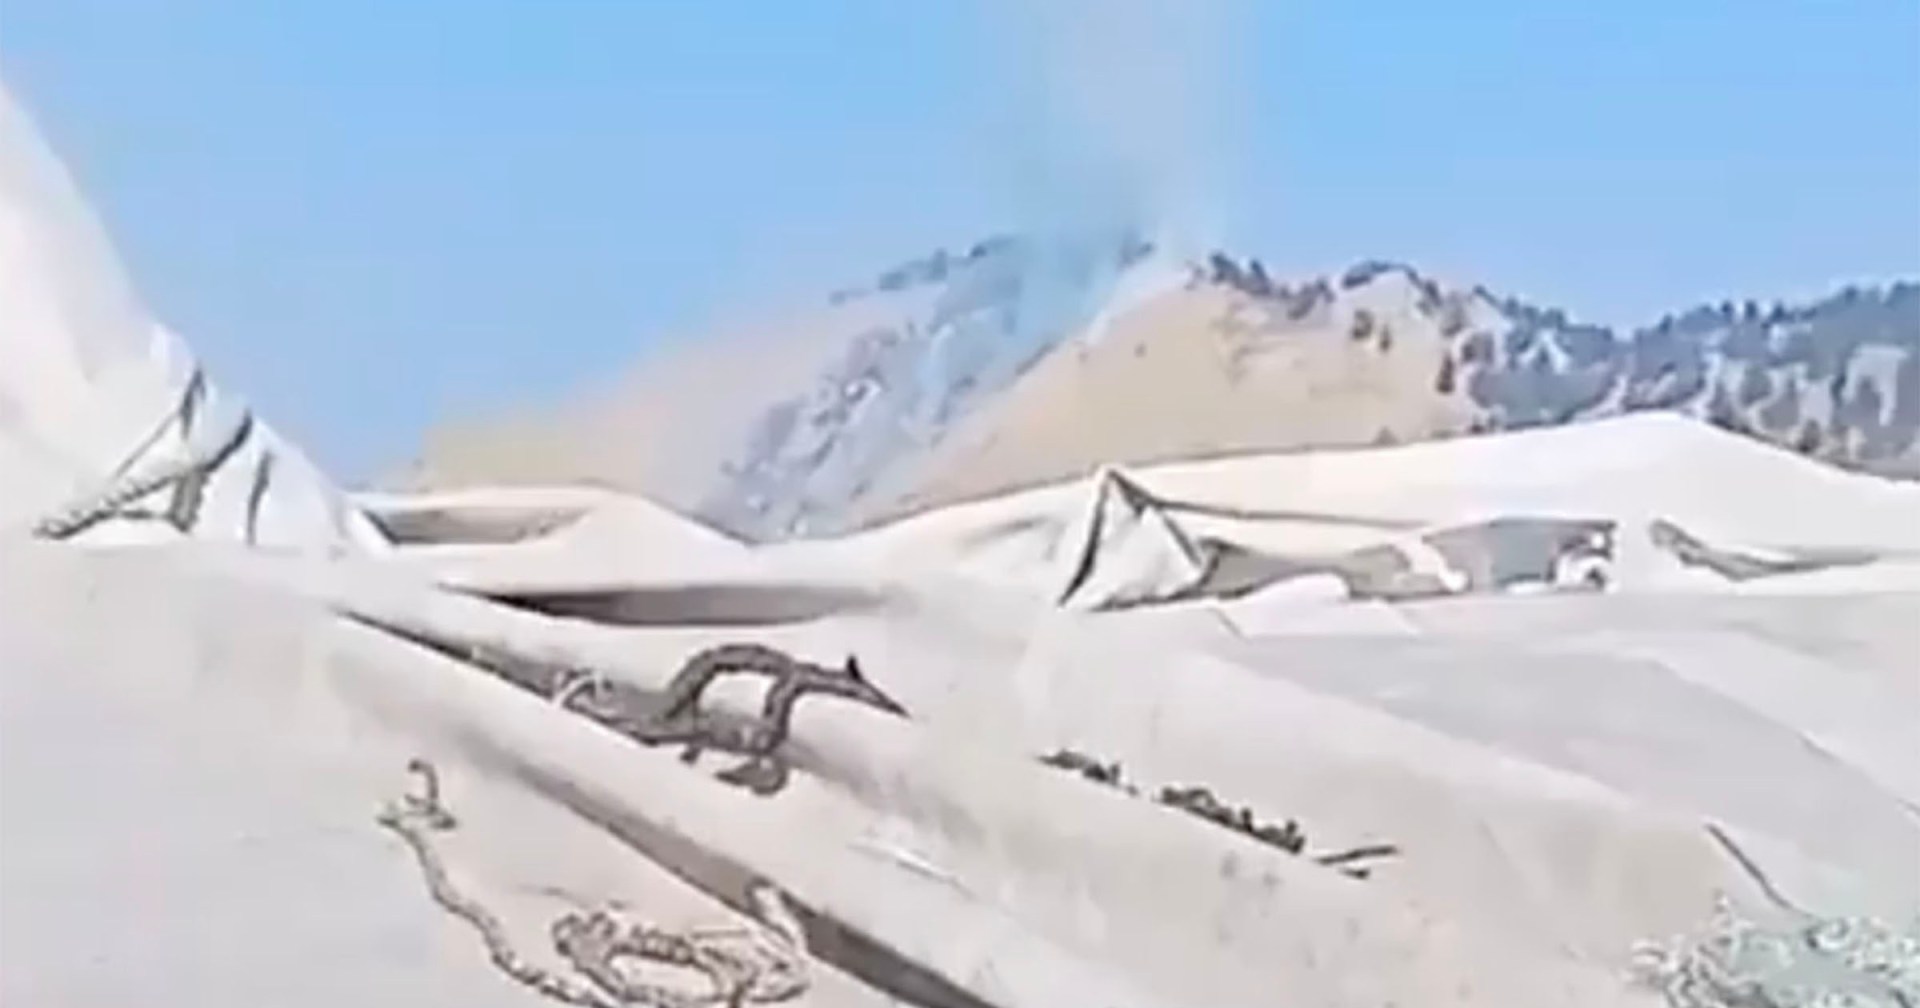 private jet with six people on board crashes into mountains after vanishing from radar